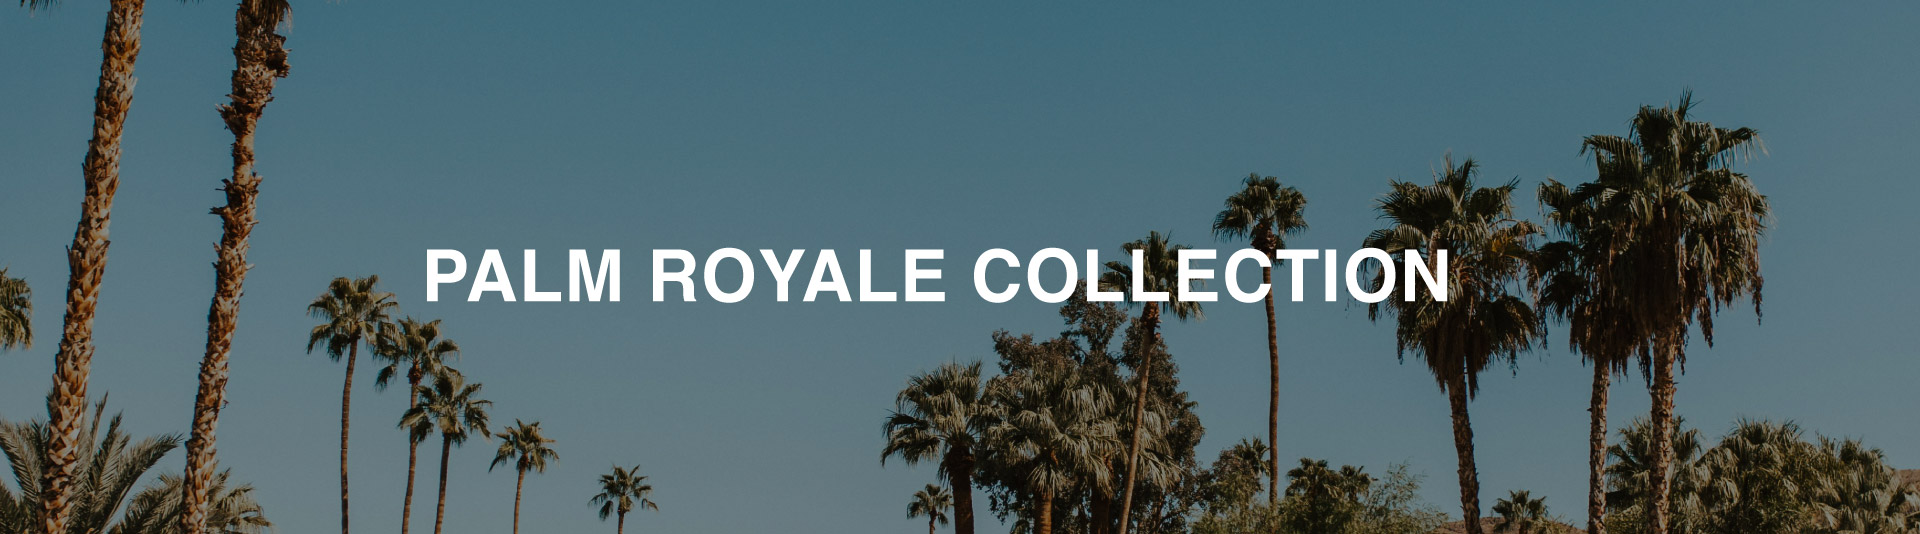 Palm Royale Collection